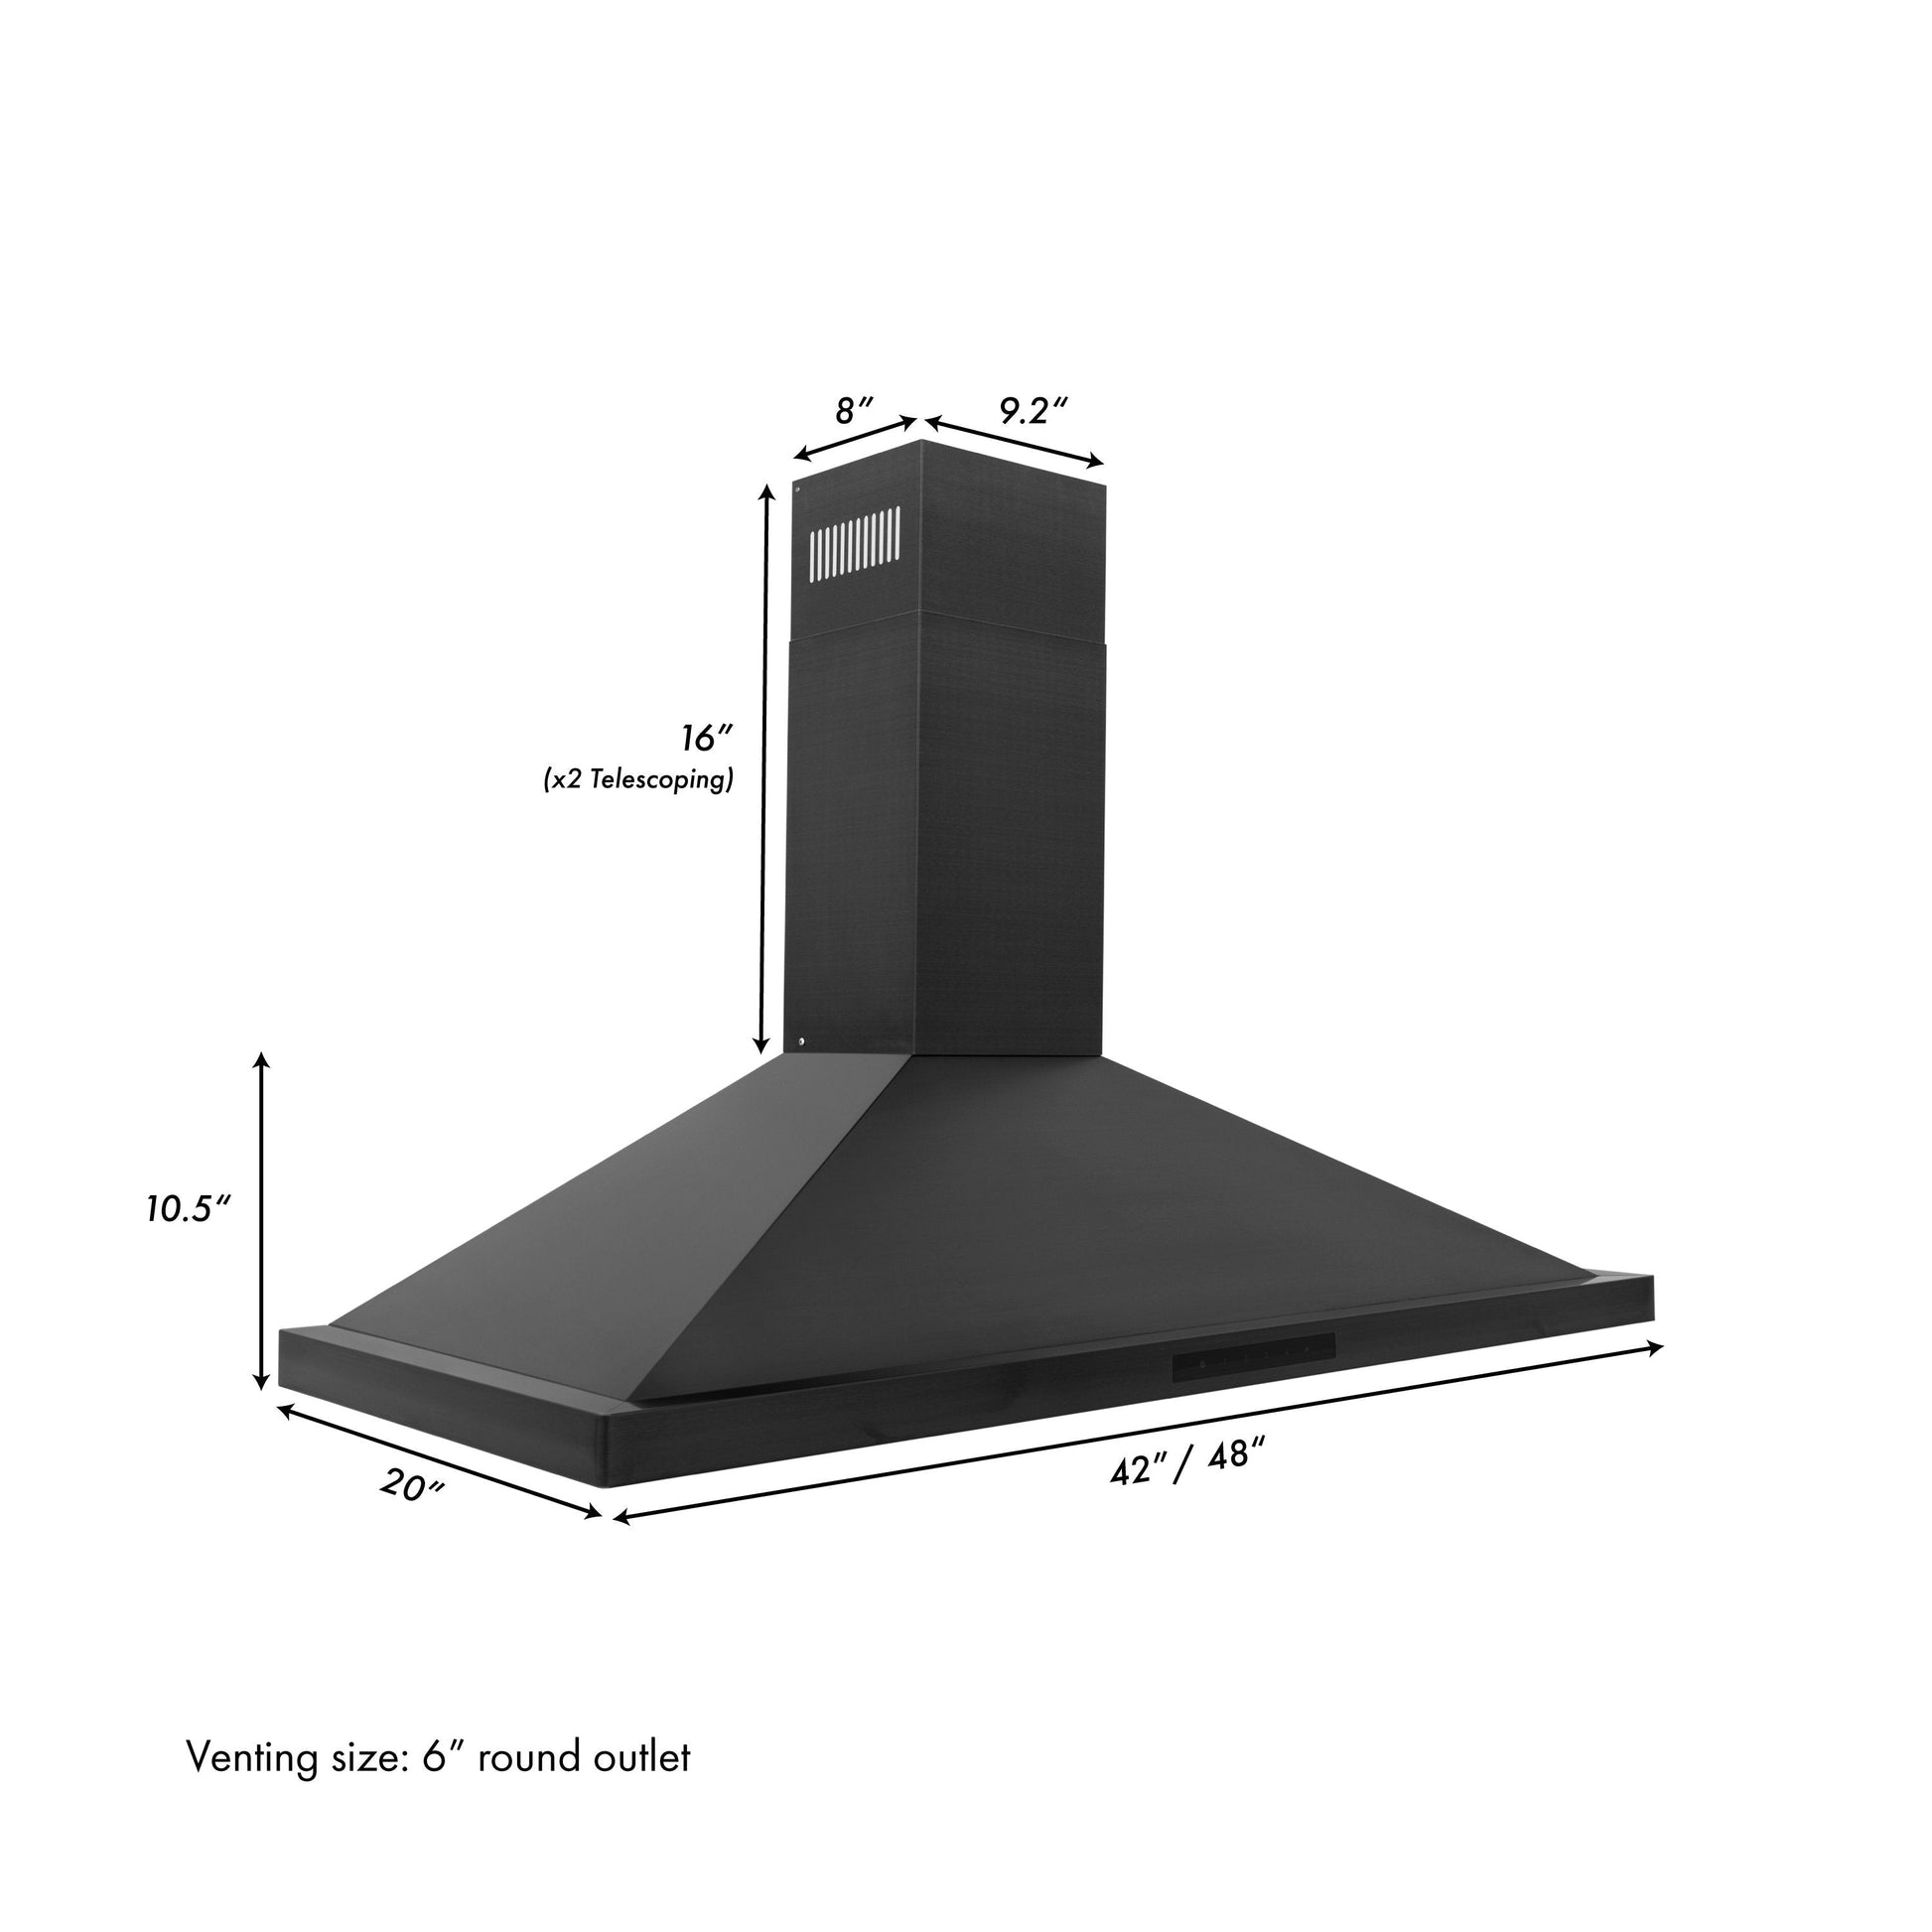 ZLINE 48" Recirculating Wall Mount Range Hood - Black Stainless Steel with Charcoal Filters